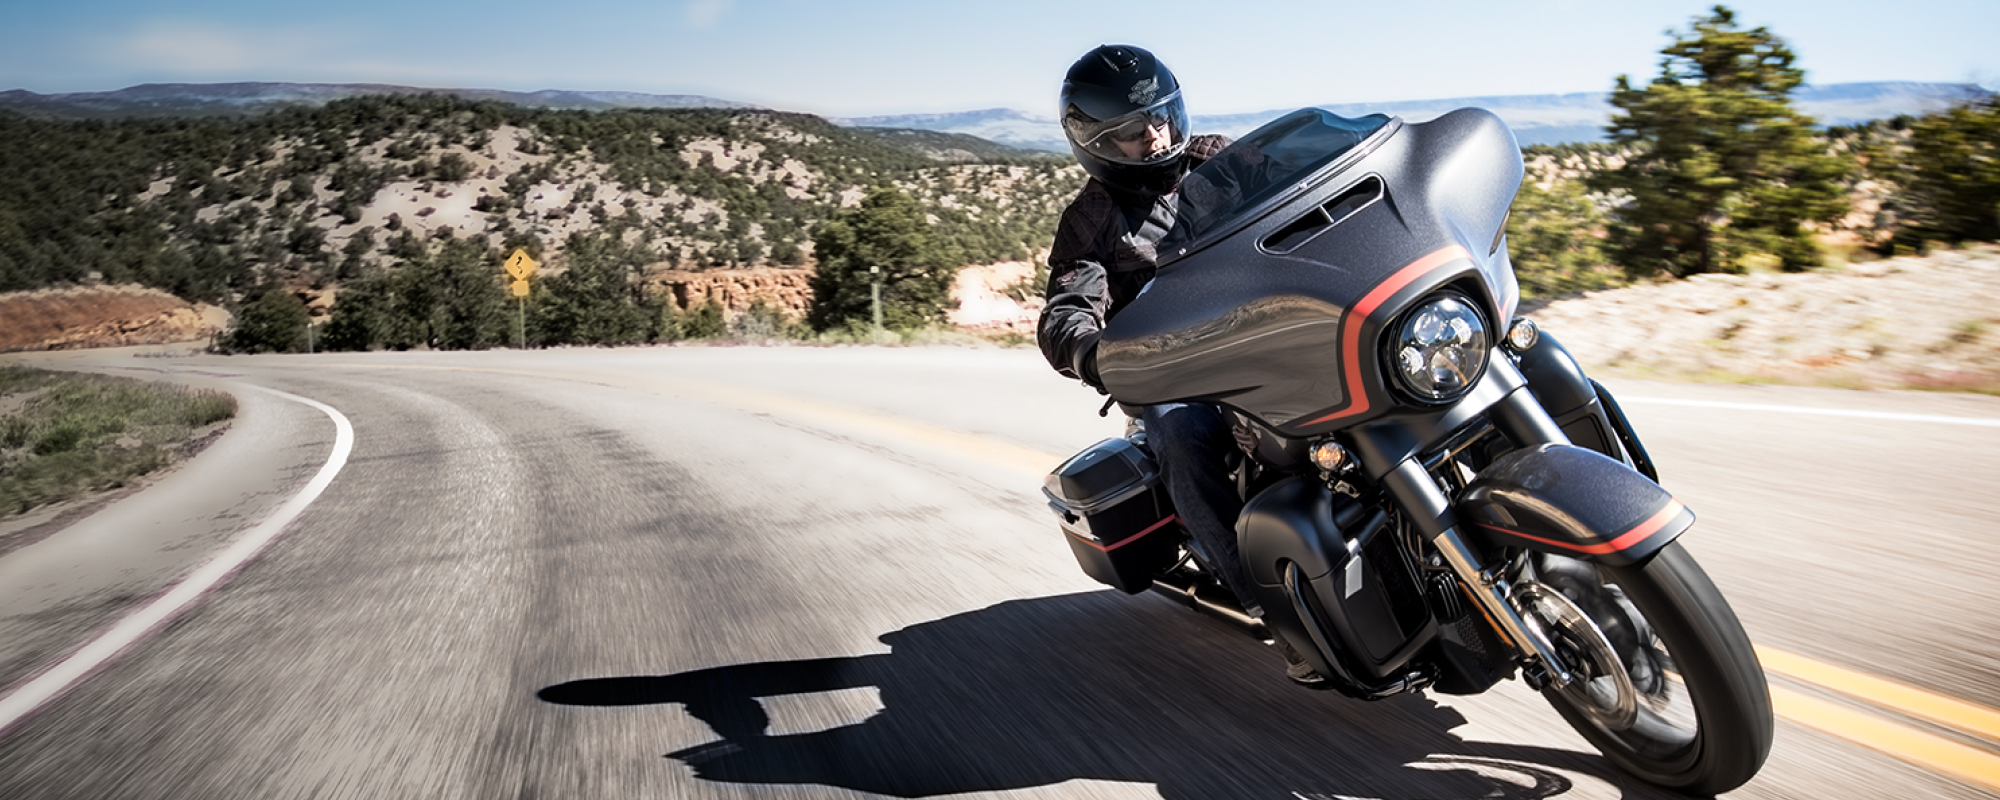 Schedule your Test Ride at Harley-Davidson of Asheville